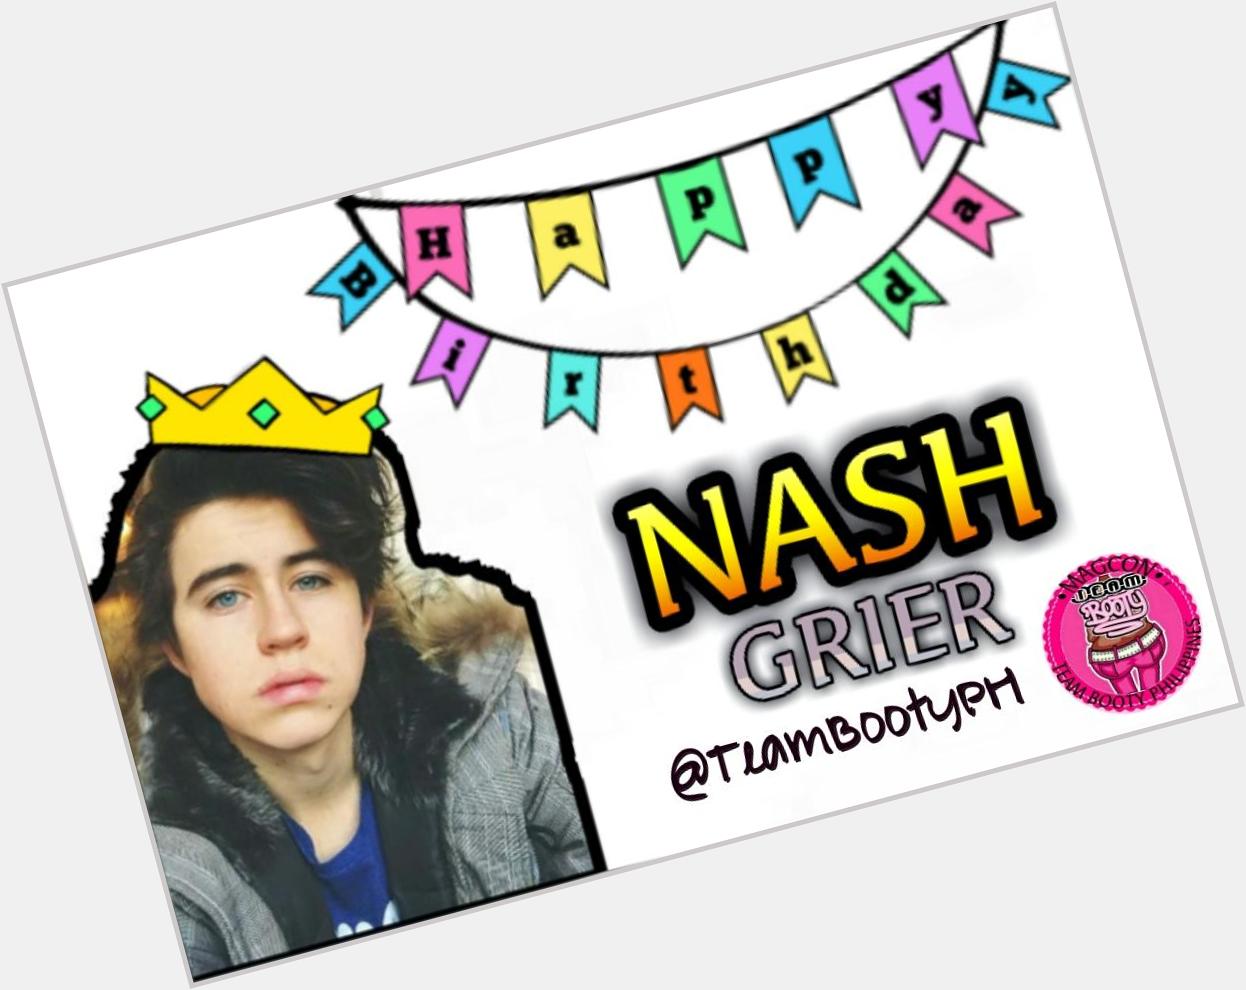 Happy Birthday to our Beloved guy, Nash grier :) Your wish, is our wish. Enjoy ur day and god bless   